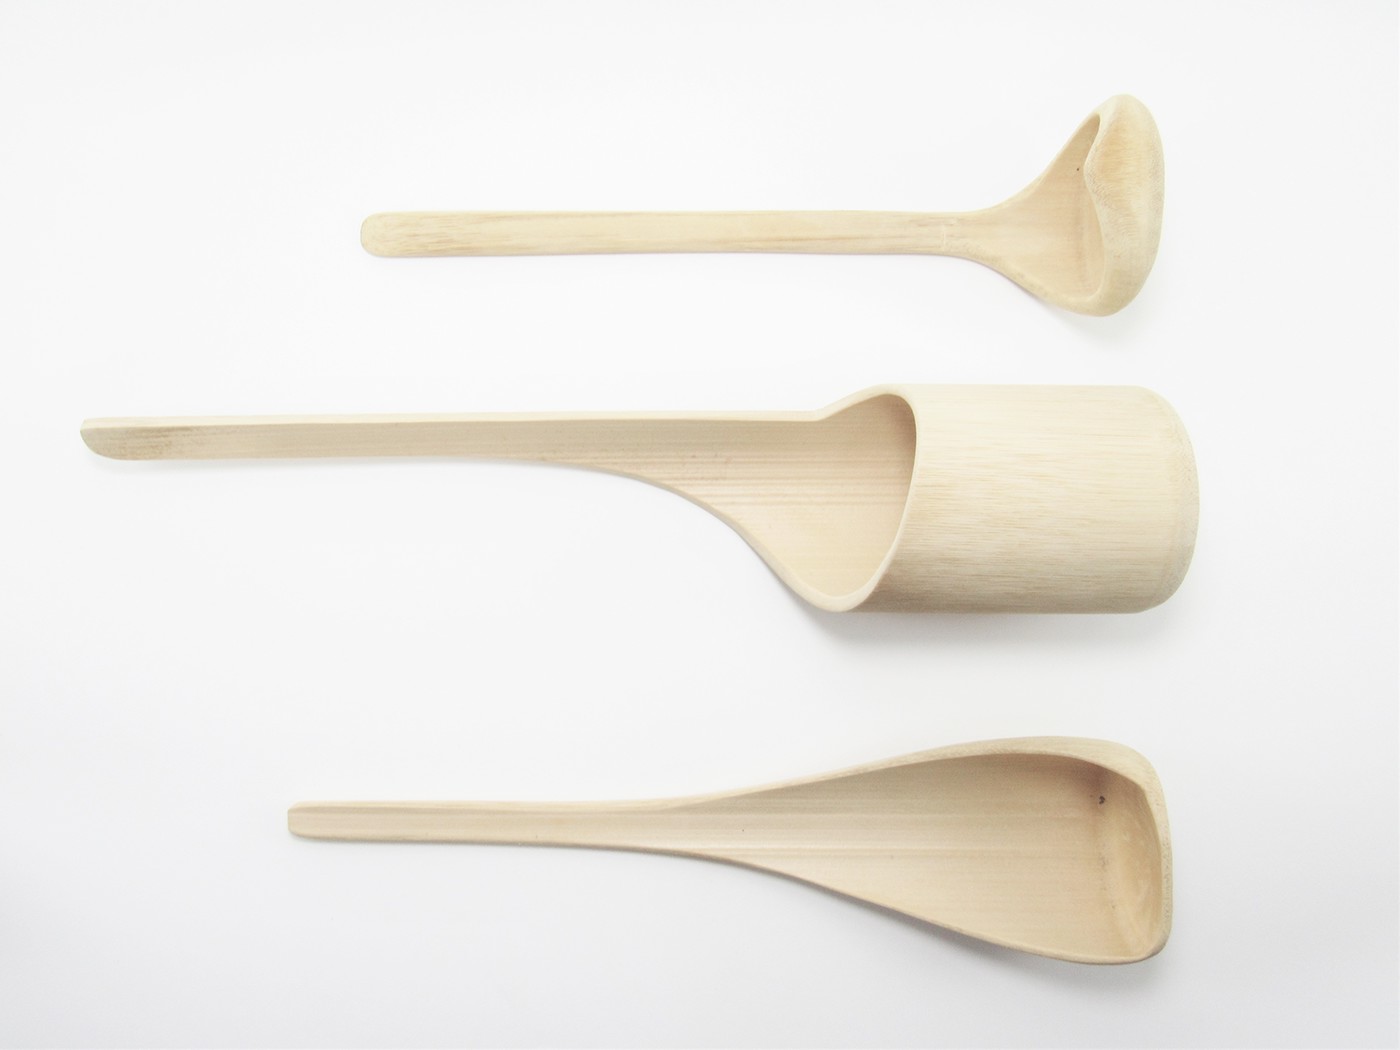 spoon bamboo design product industrial Sustainable eco material Nature Soup